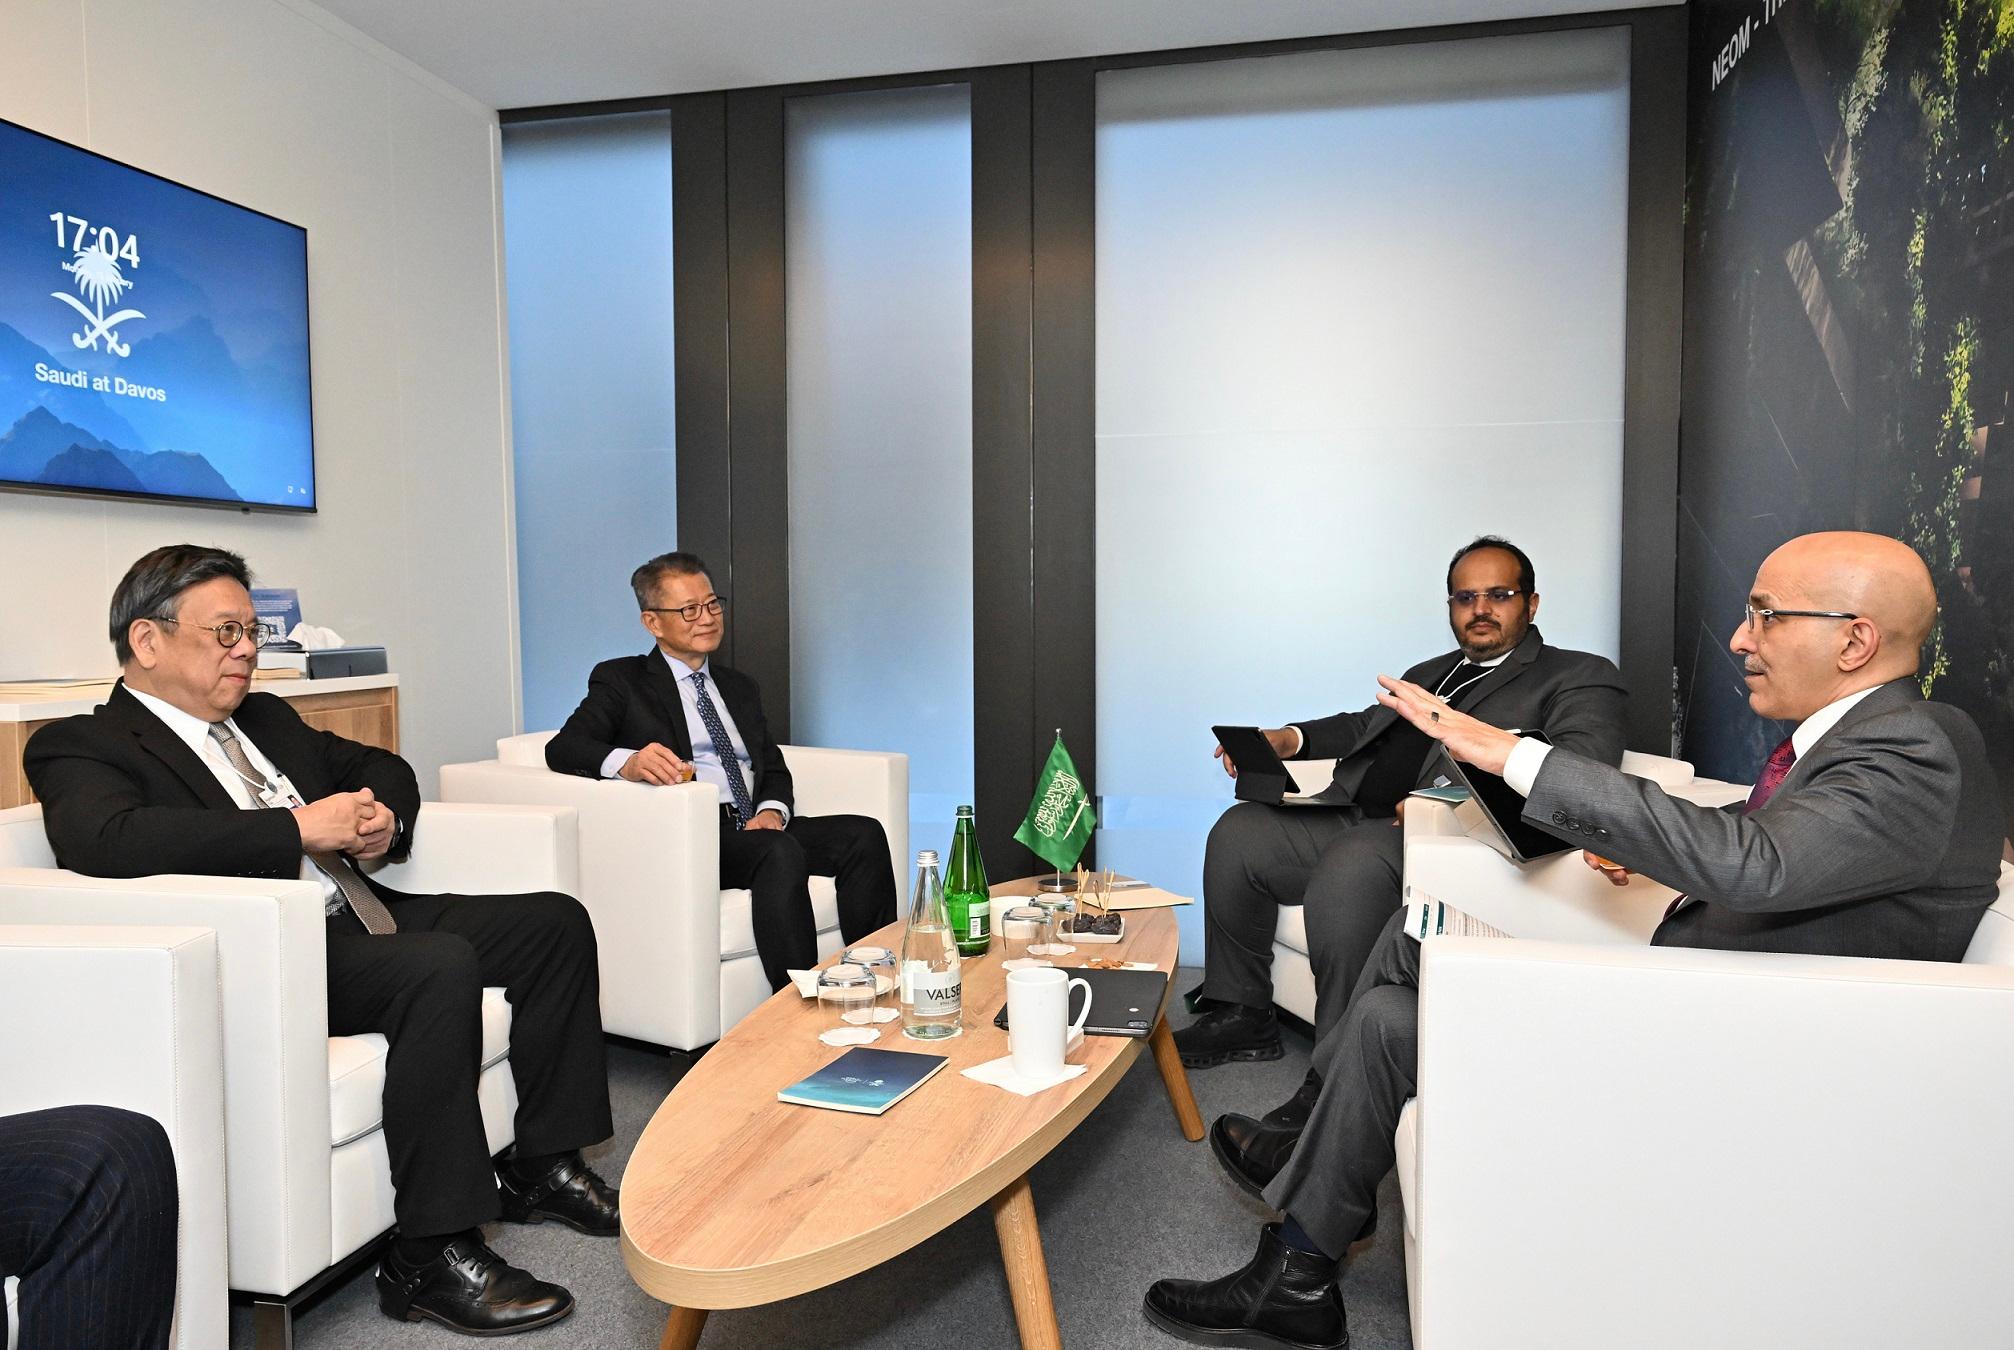 The Financial Secretary, Mr Paul Chan (second left) and the Secretary for Commerce and Economic Development, Mr Algernon Yau (first left), meet with the Minister of Finance of Saudi Arabia, Mr Mohammed Al-Jadaan (first right), on January 15 (Davos time) during the World Economic Forum Annual Meeting at Davos, Switzerland.